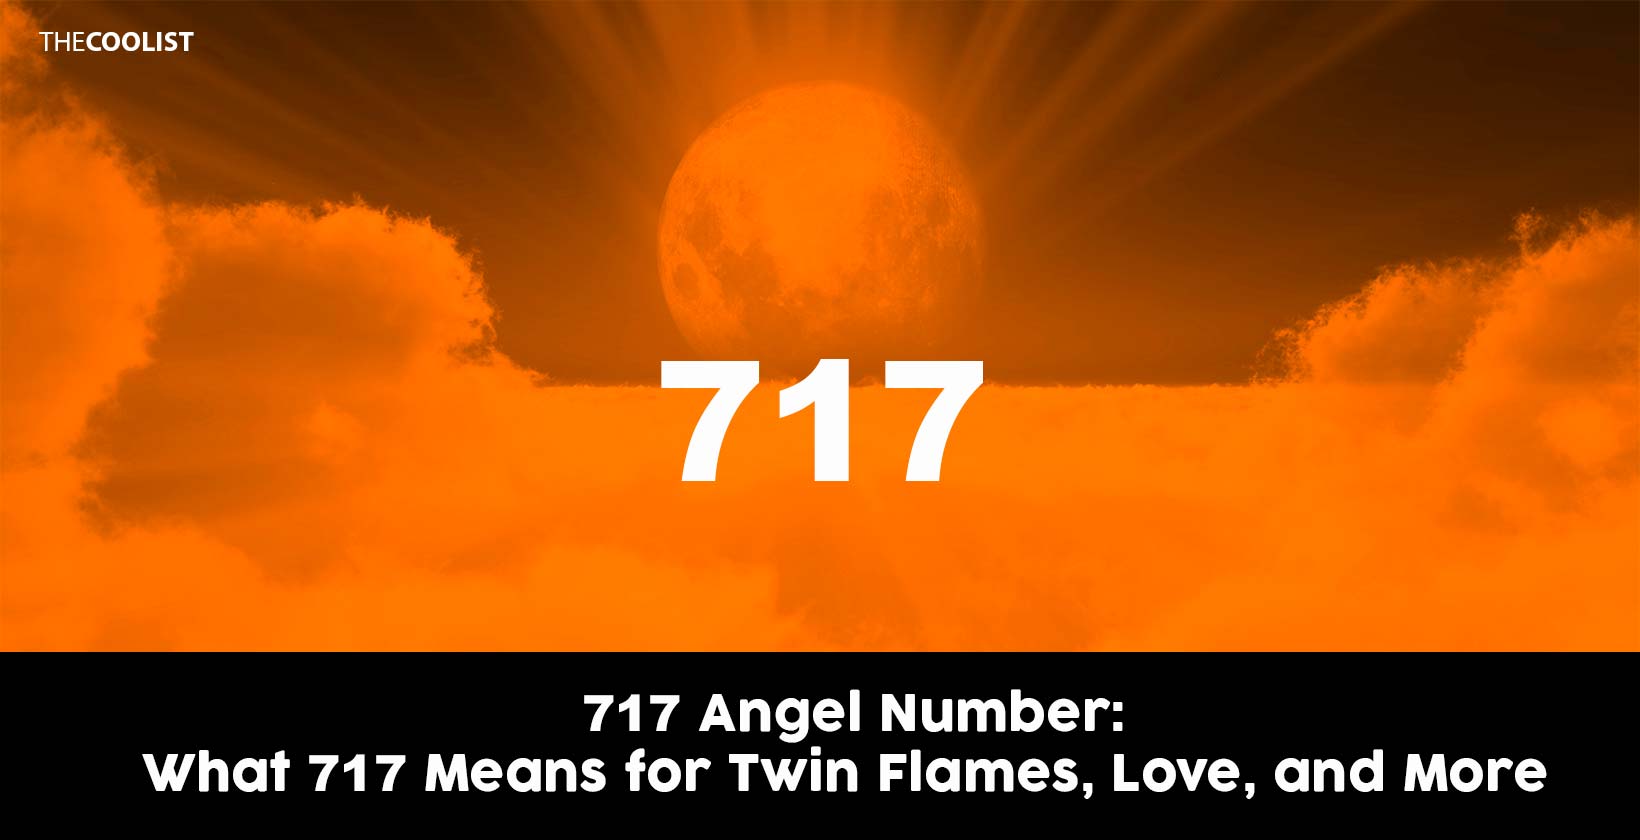 717 Angel Number: What 717 Means for Twin Flames, Love, and More